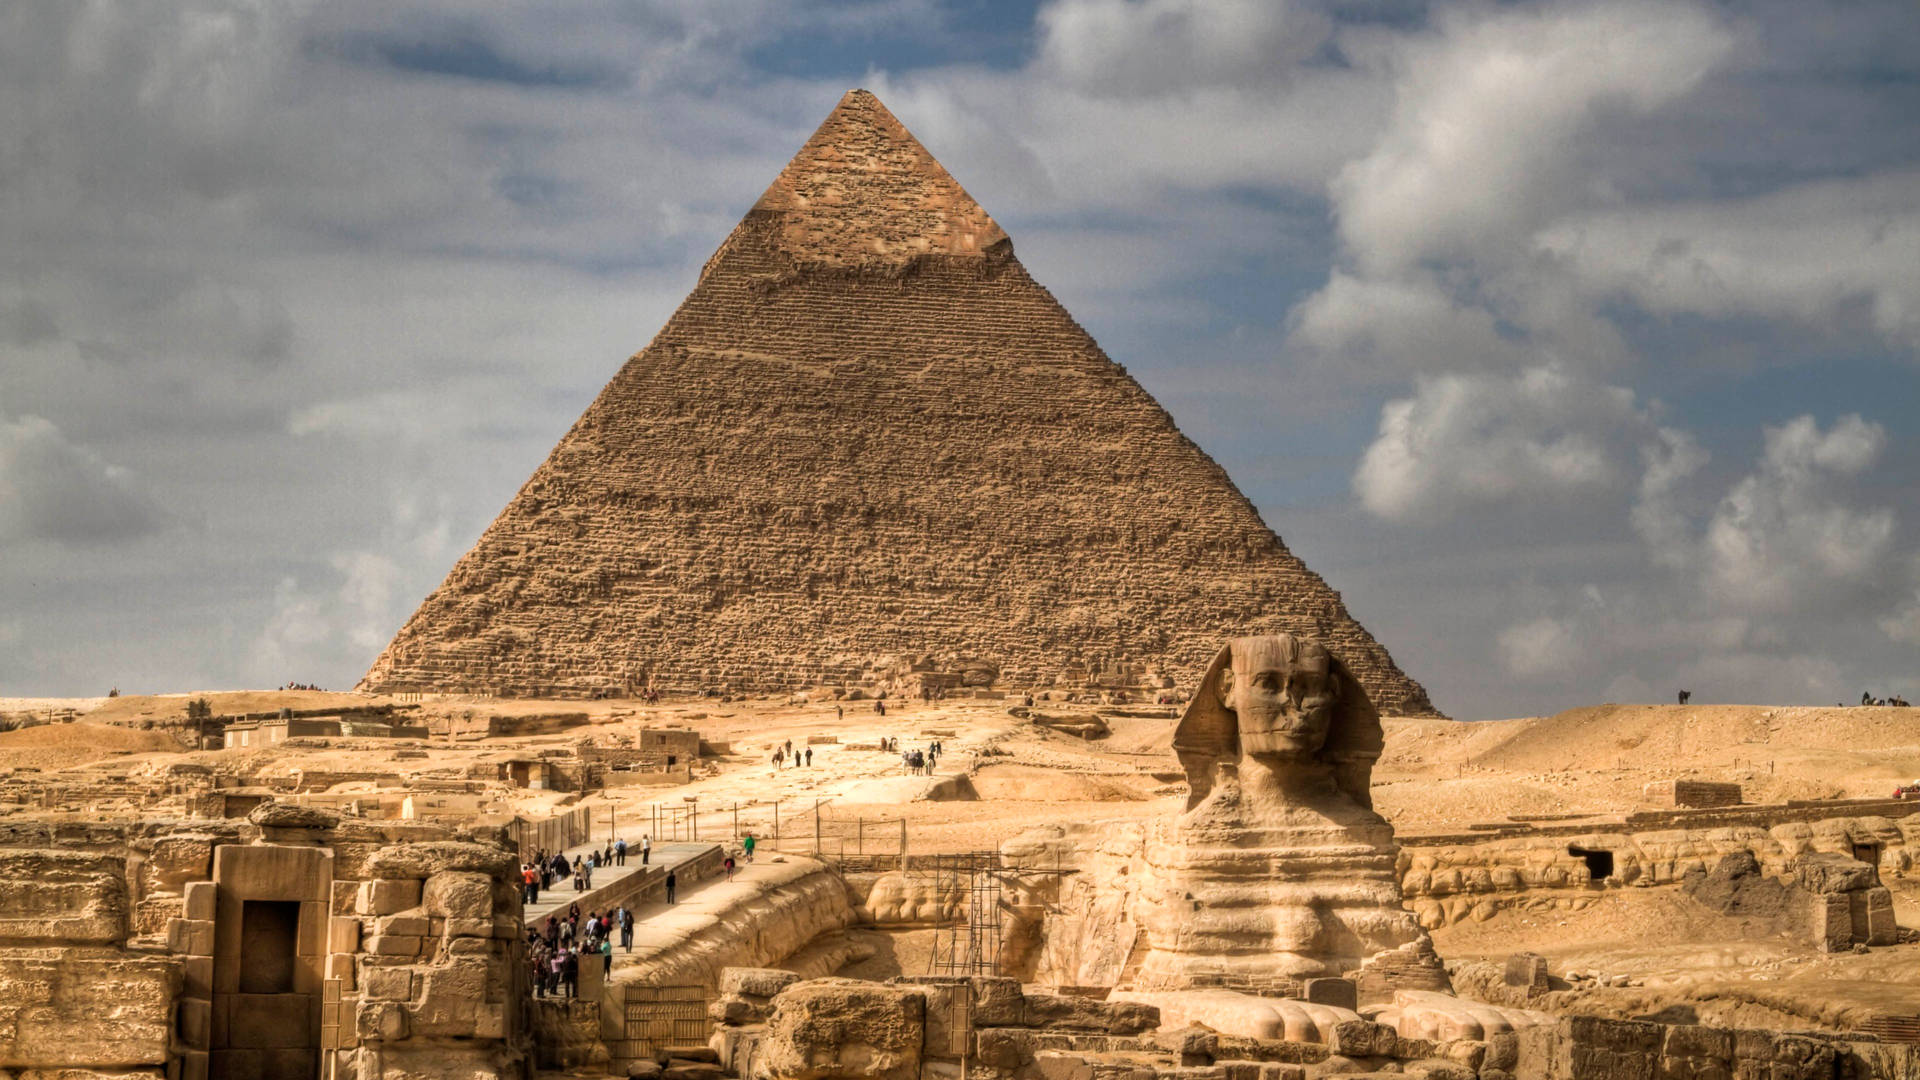 Caption: Scenic Beauty Of Pyramid And Sphinx In Egypt